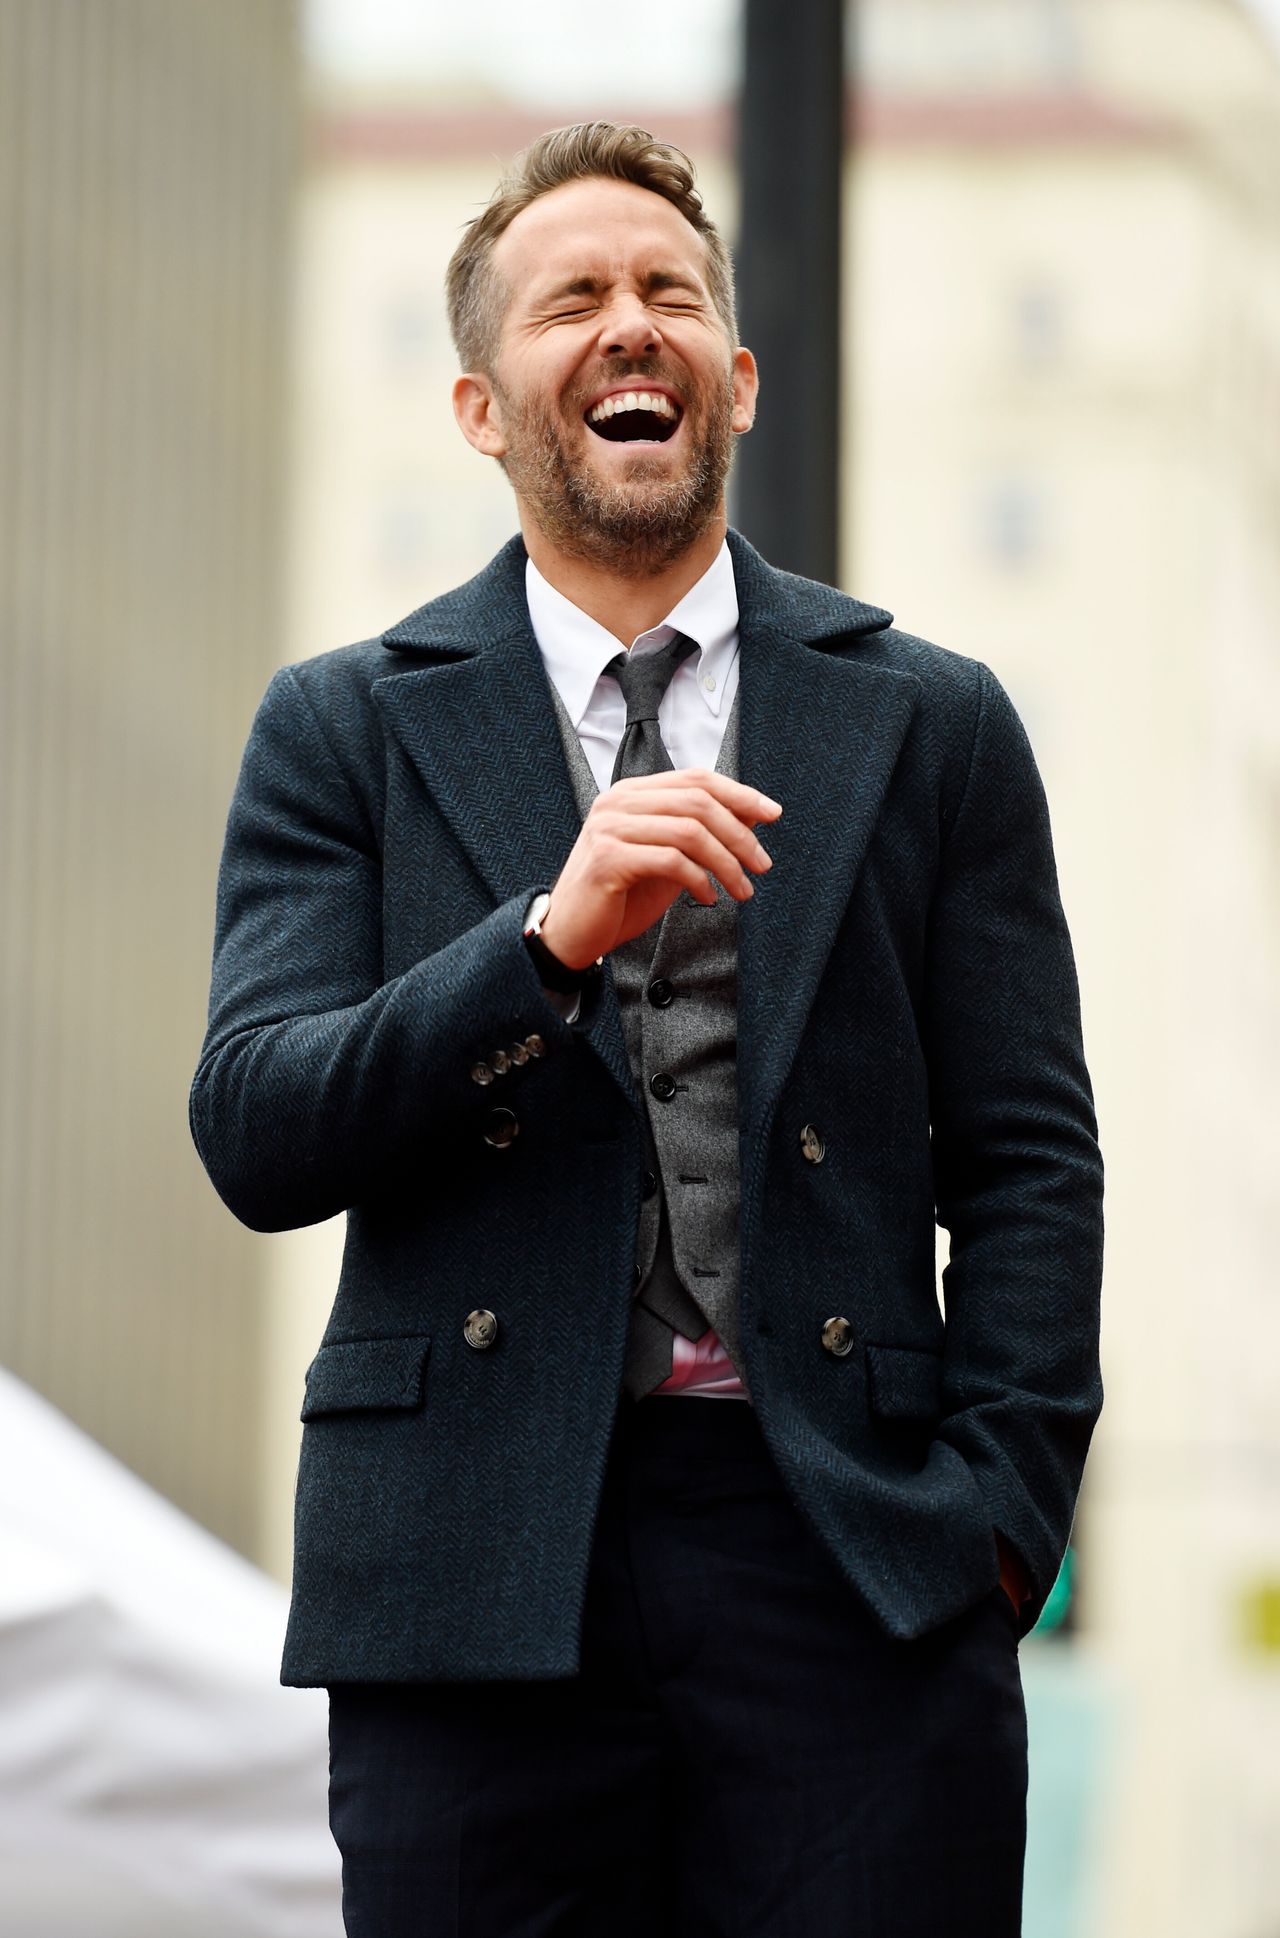 Very Funny, Very Smart': How Ryan Reynolds Became Hollywood's Most Likeable  (And Bankable) Star | HuffPost UK Entertainment